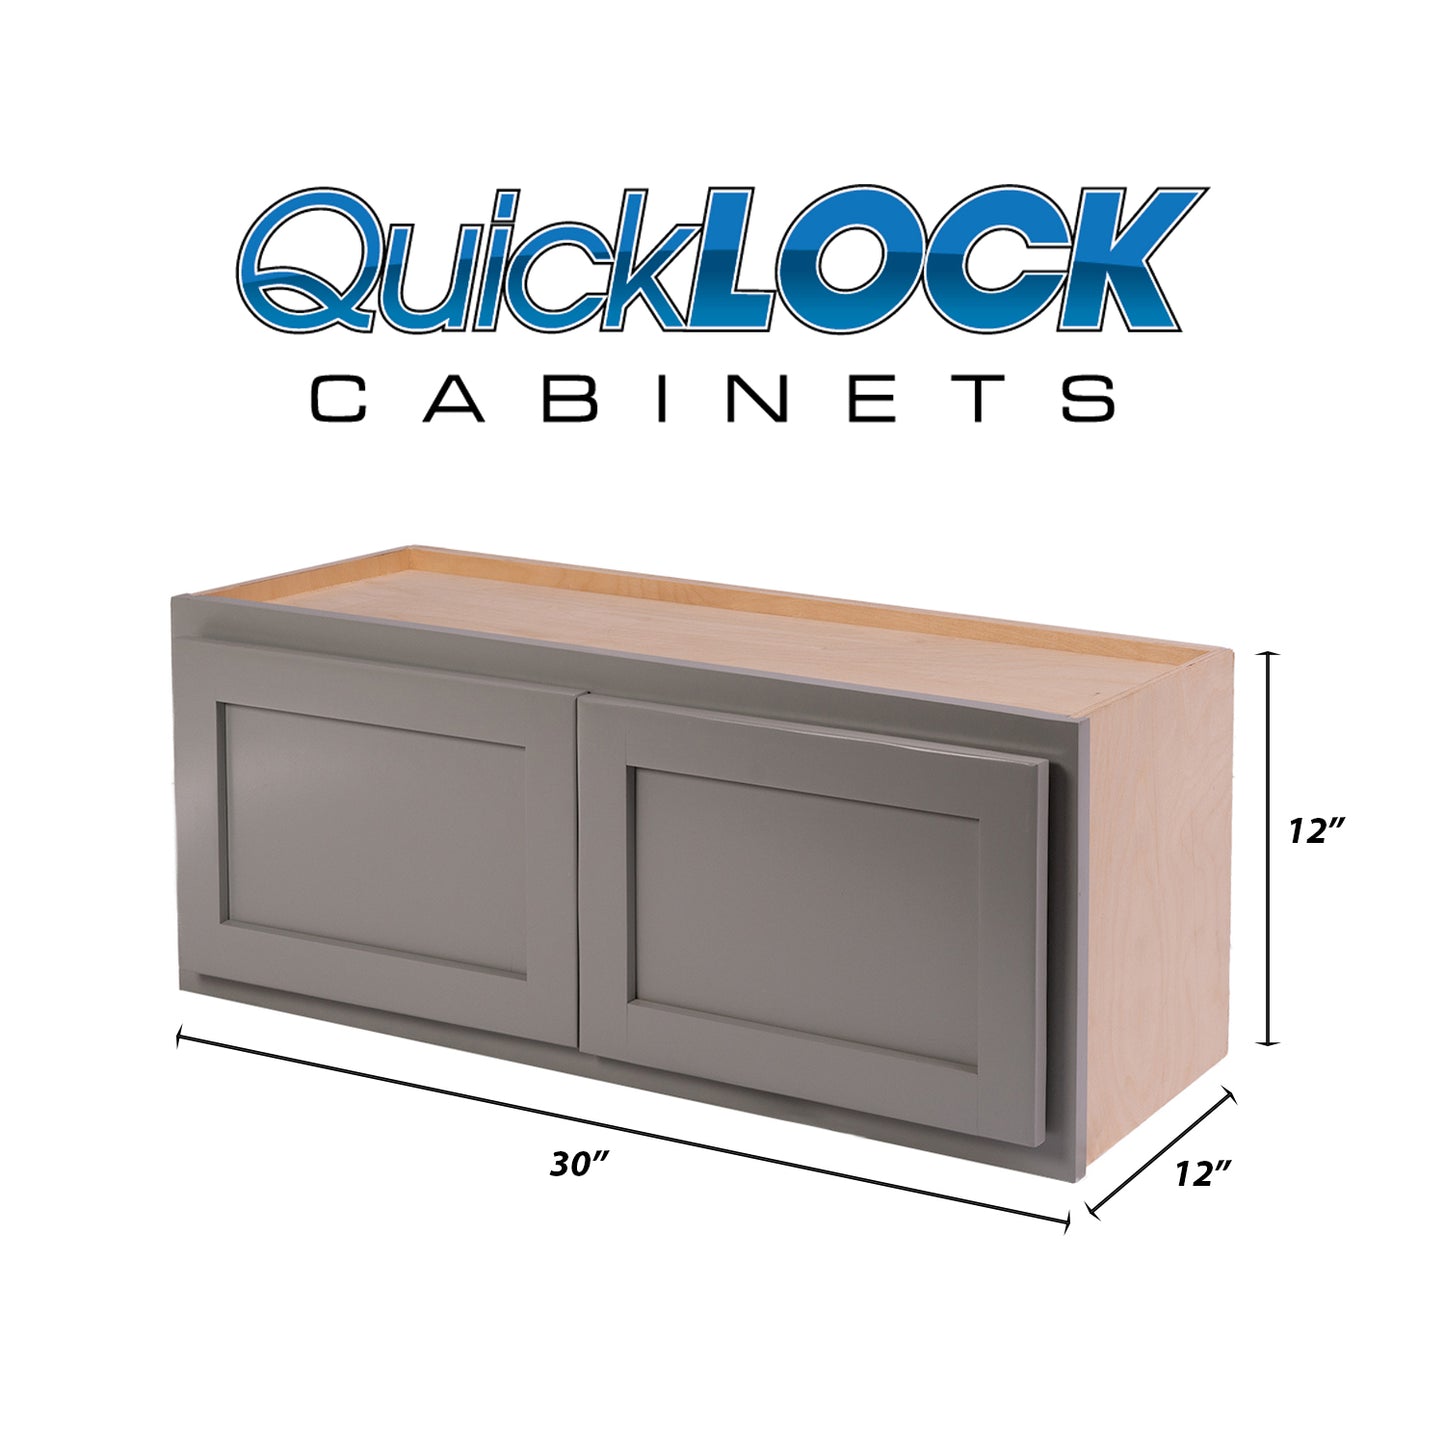 Quicklock RTA (Ready-to-Assemble) Magnetic Grey 30"Wx12"Hx12"D Wall Microwave